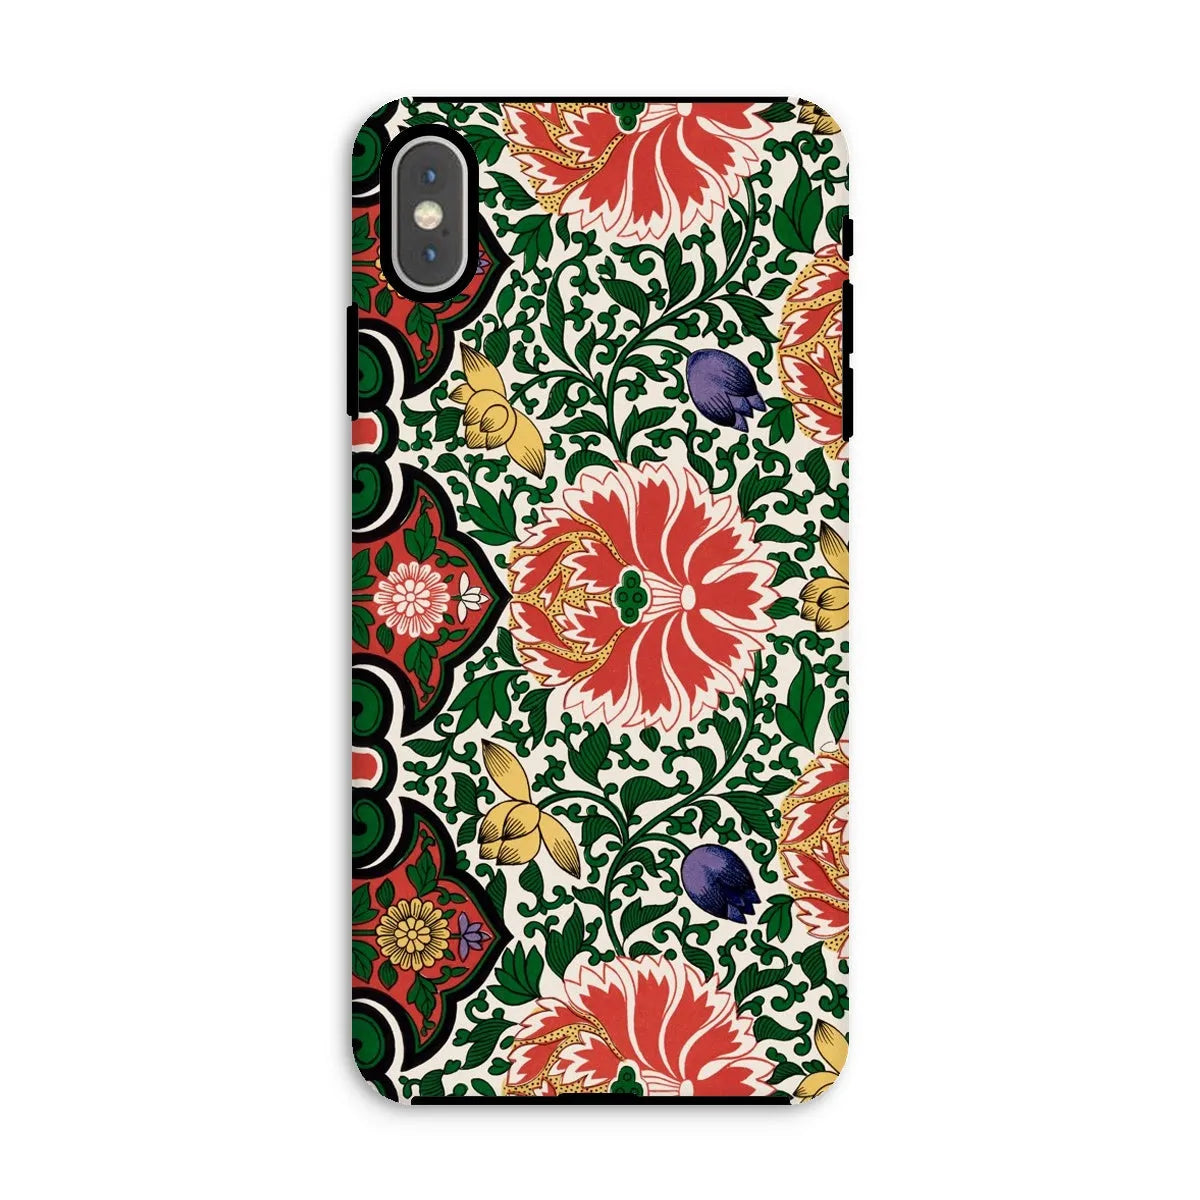 Chinese Floral Pattern Aesthetic Art Phone Case - Owen Jones - Iphone Xs Max / Matte - Mobile Phone Cases - Aesthetic